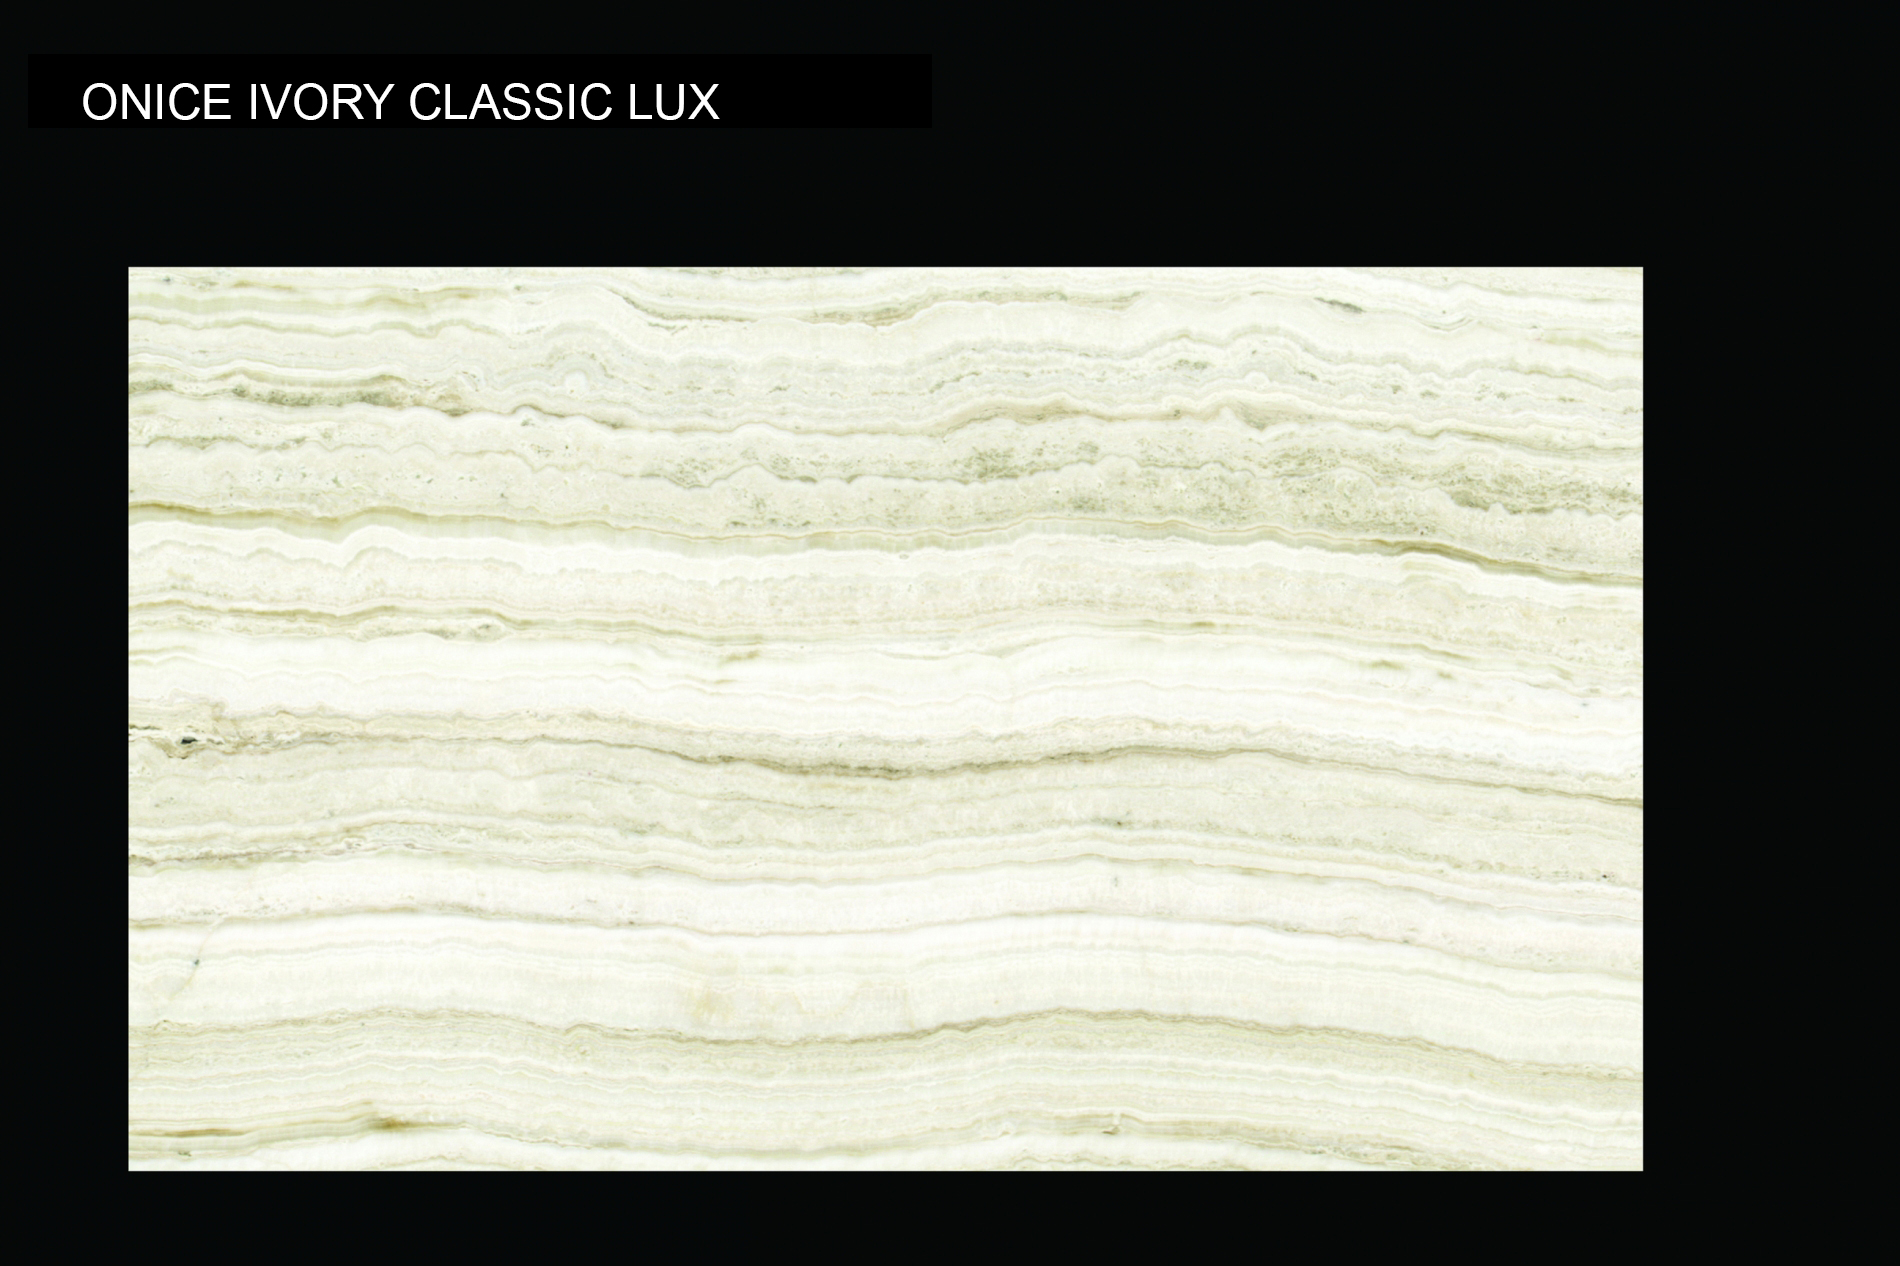 Onice Ivory Classic Lux